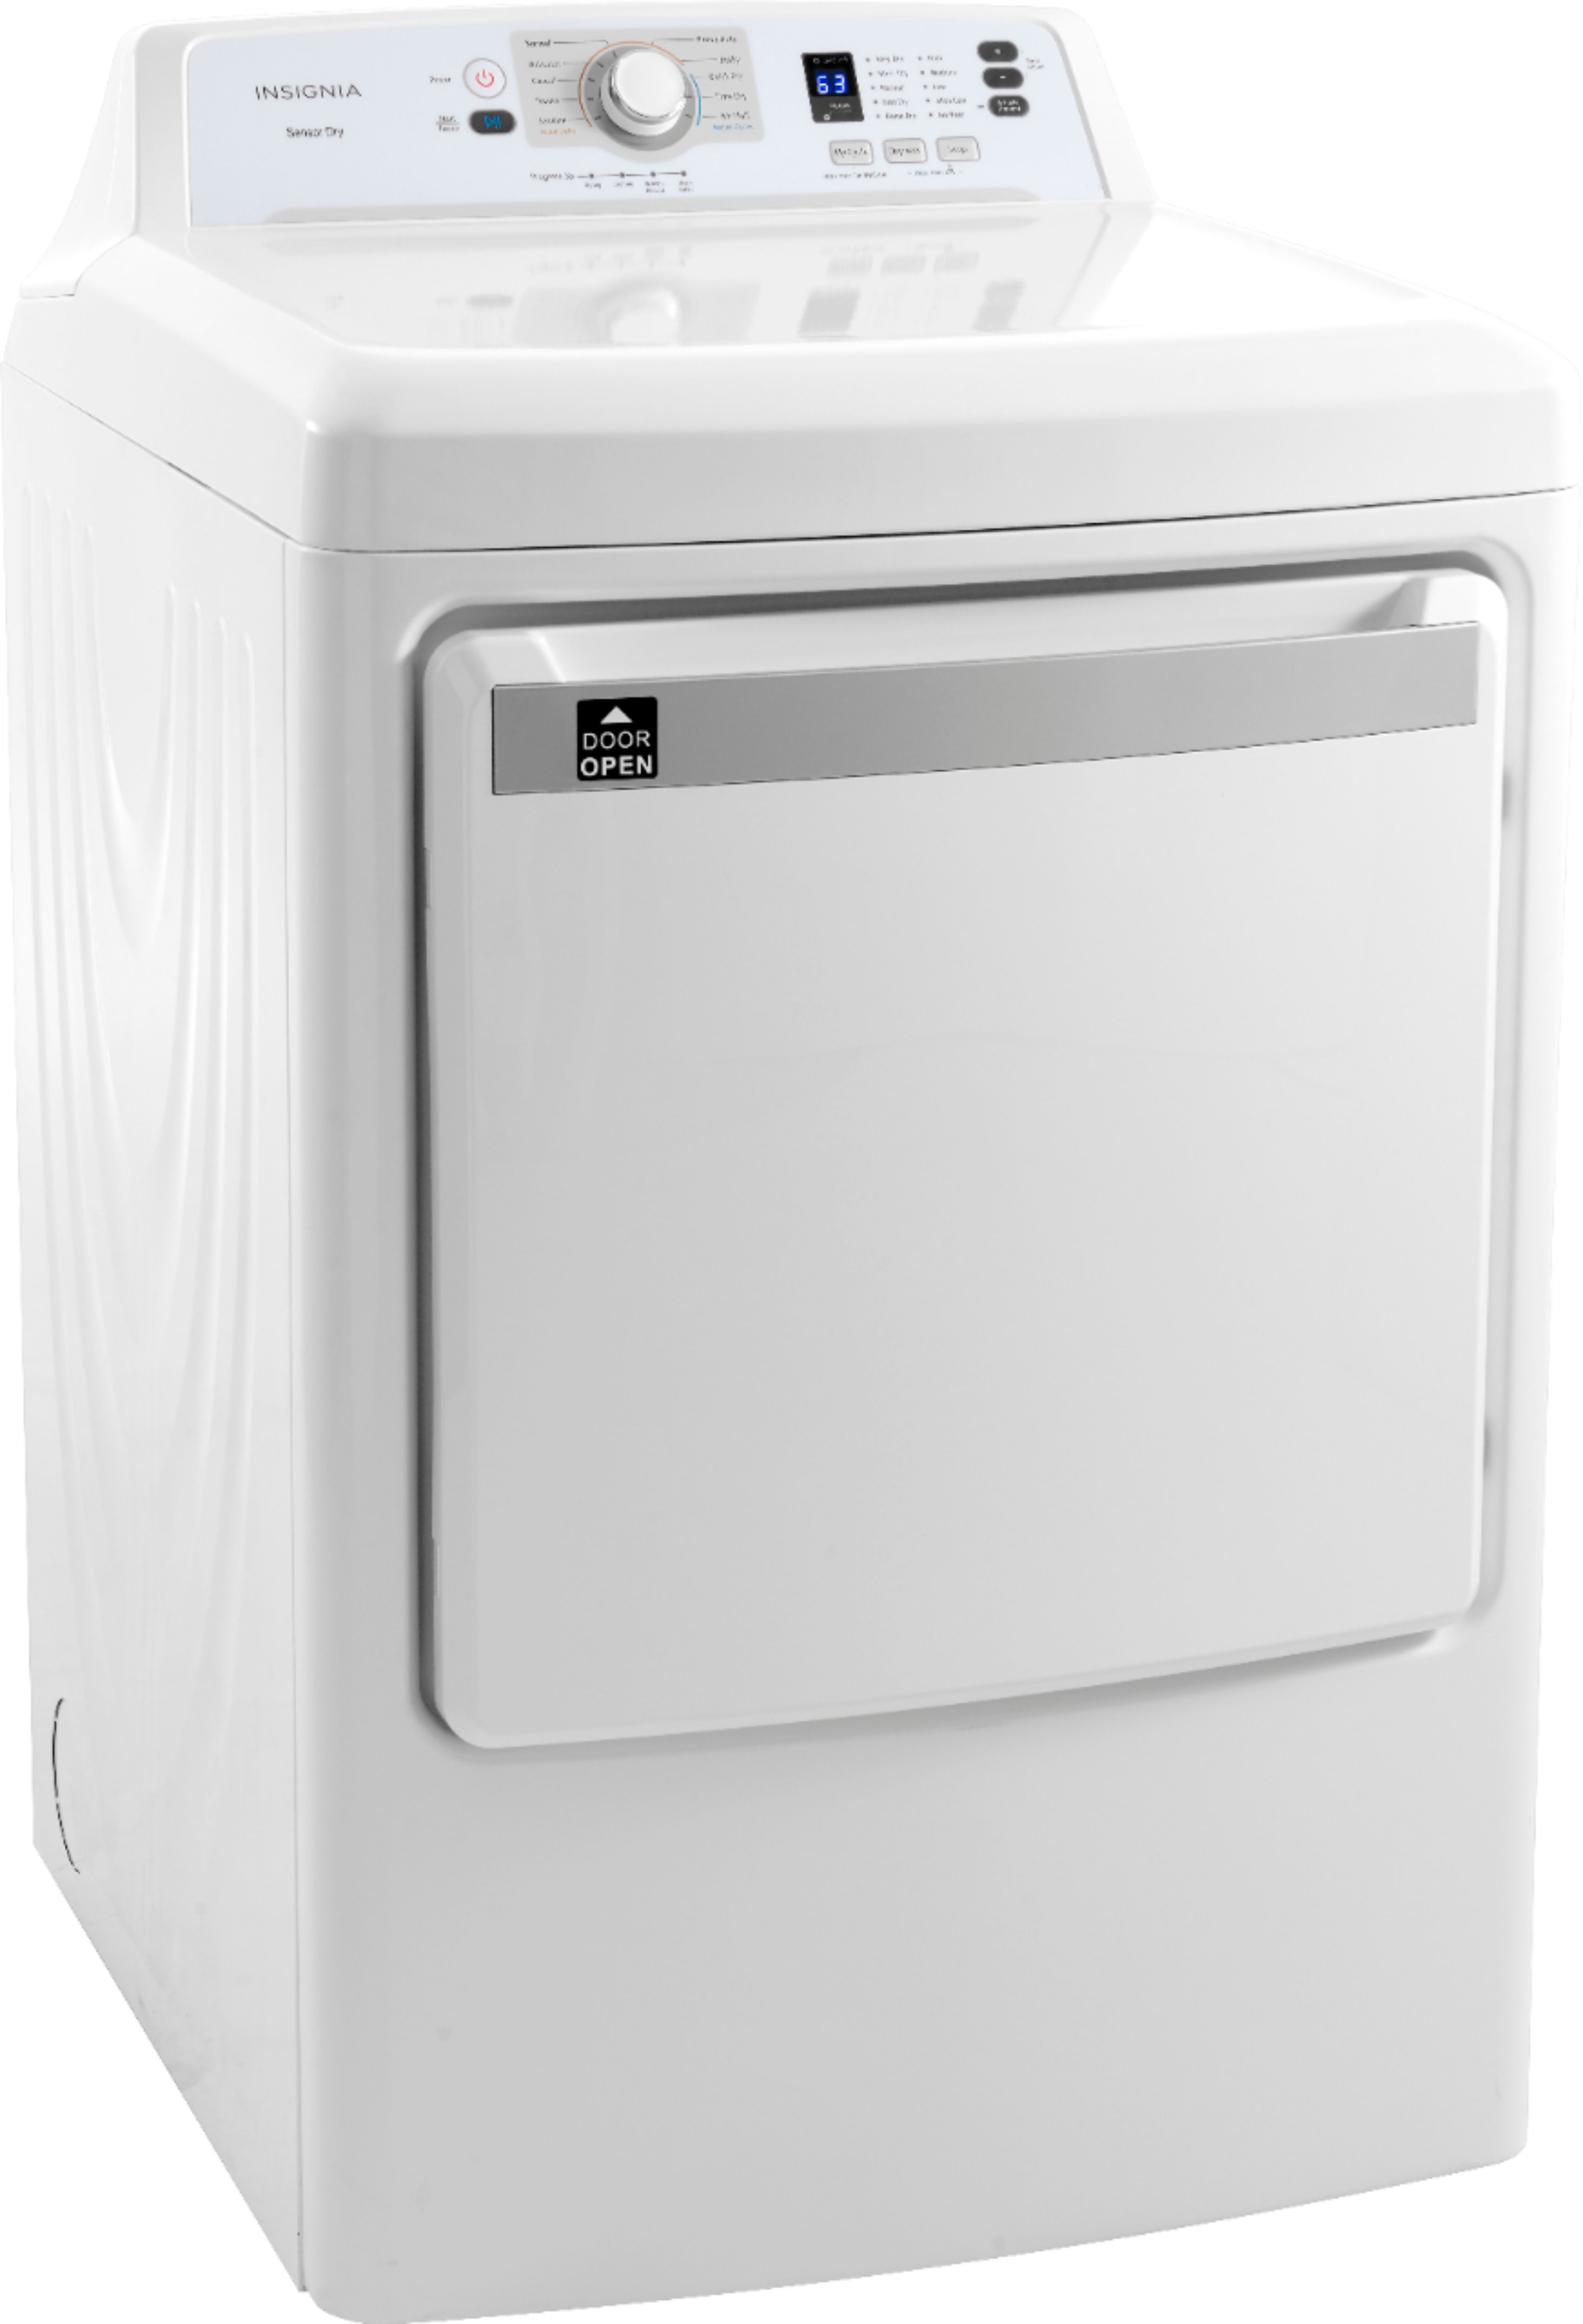 Angle View: Samsung - 7.5 Cu. Ft. Stackable Electric Dryer with Steam and Sensor Dry - Platinum